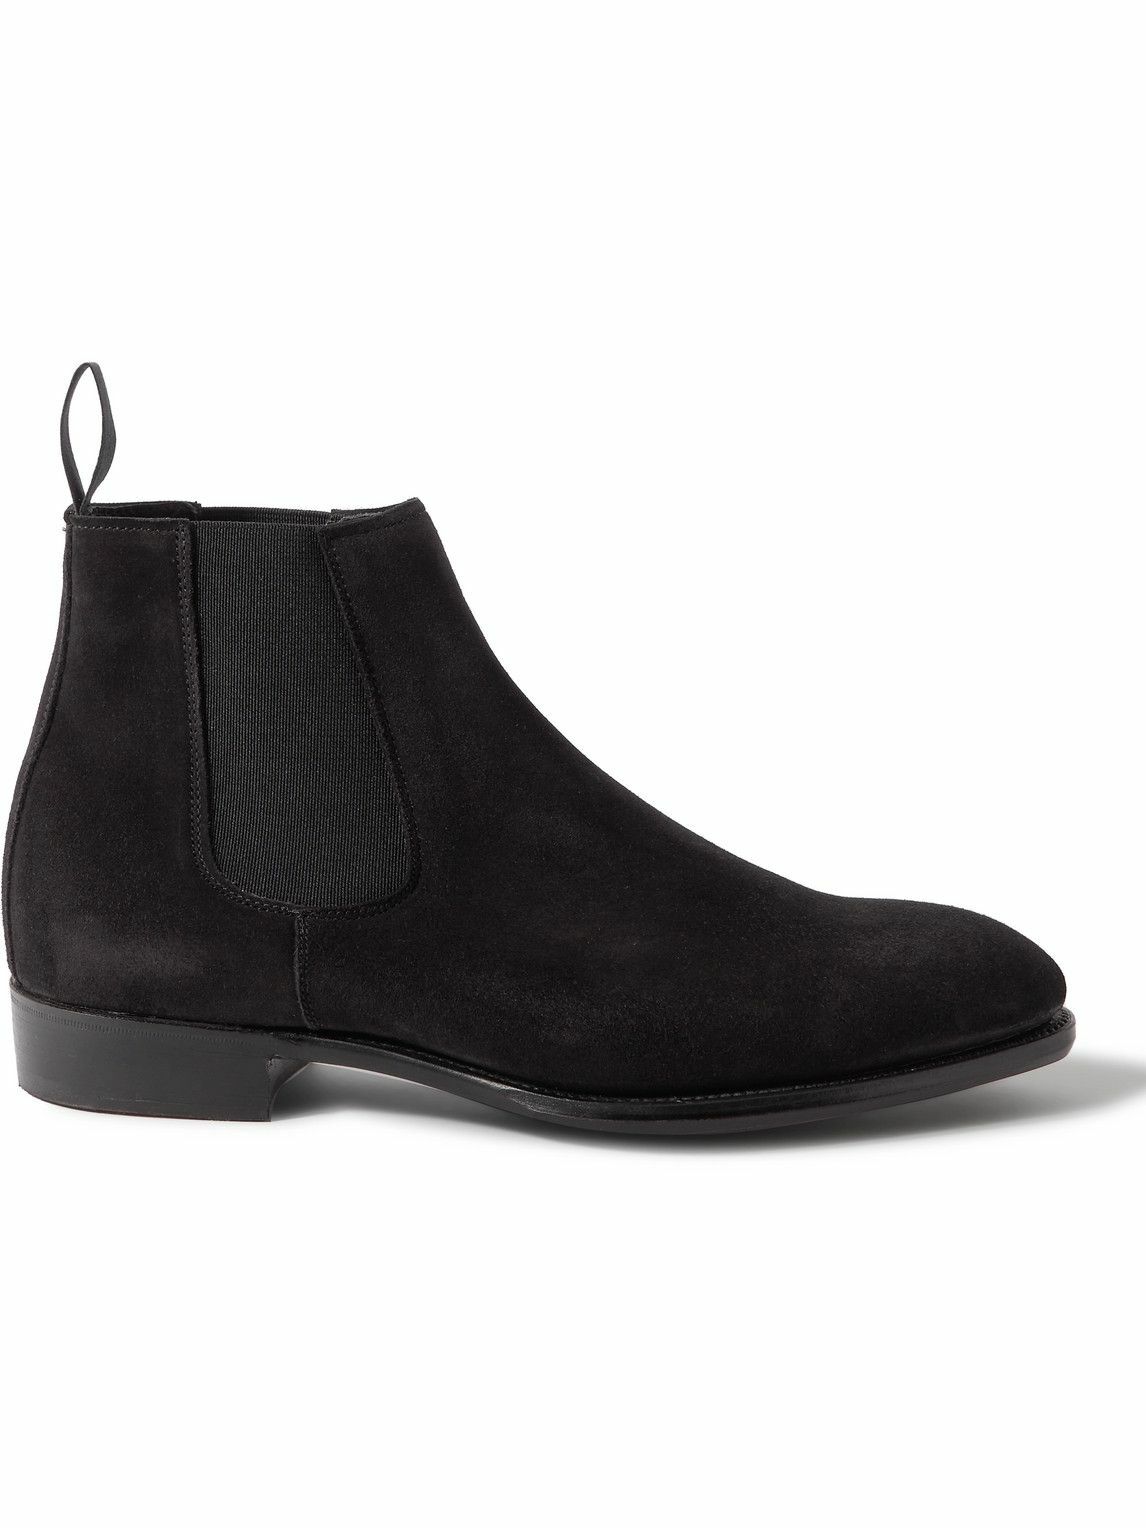 George Cleverley - Jason Suede Chelsea Boots - Black George Cleverley